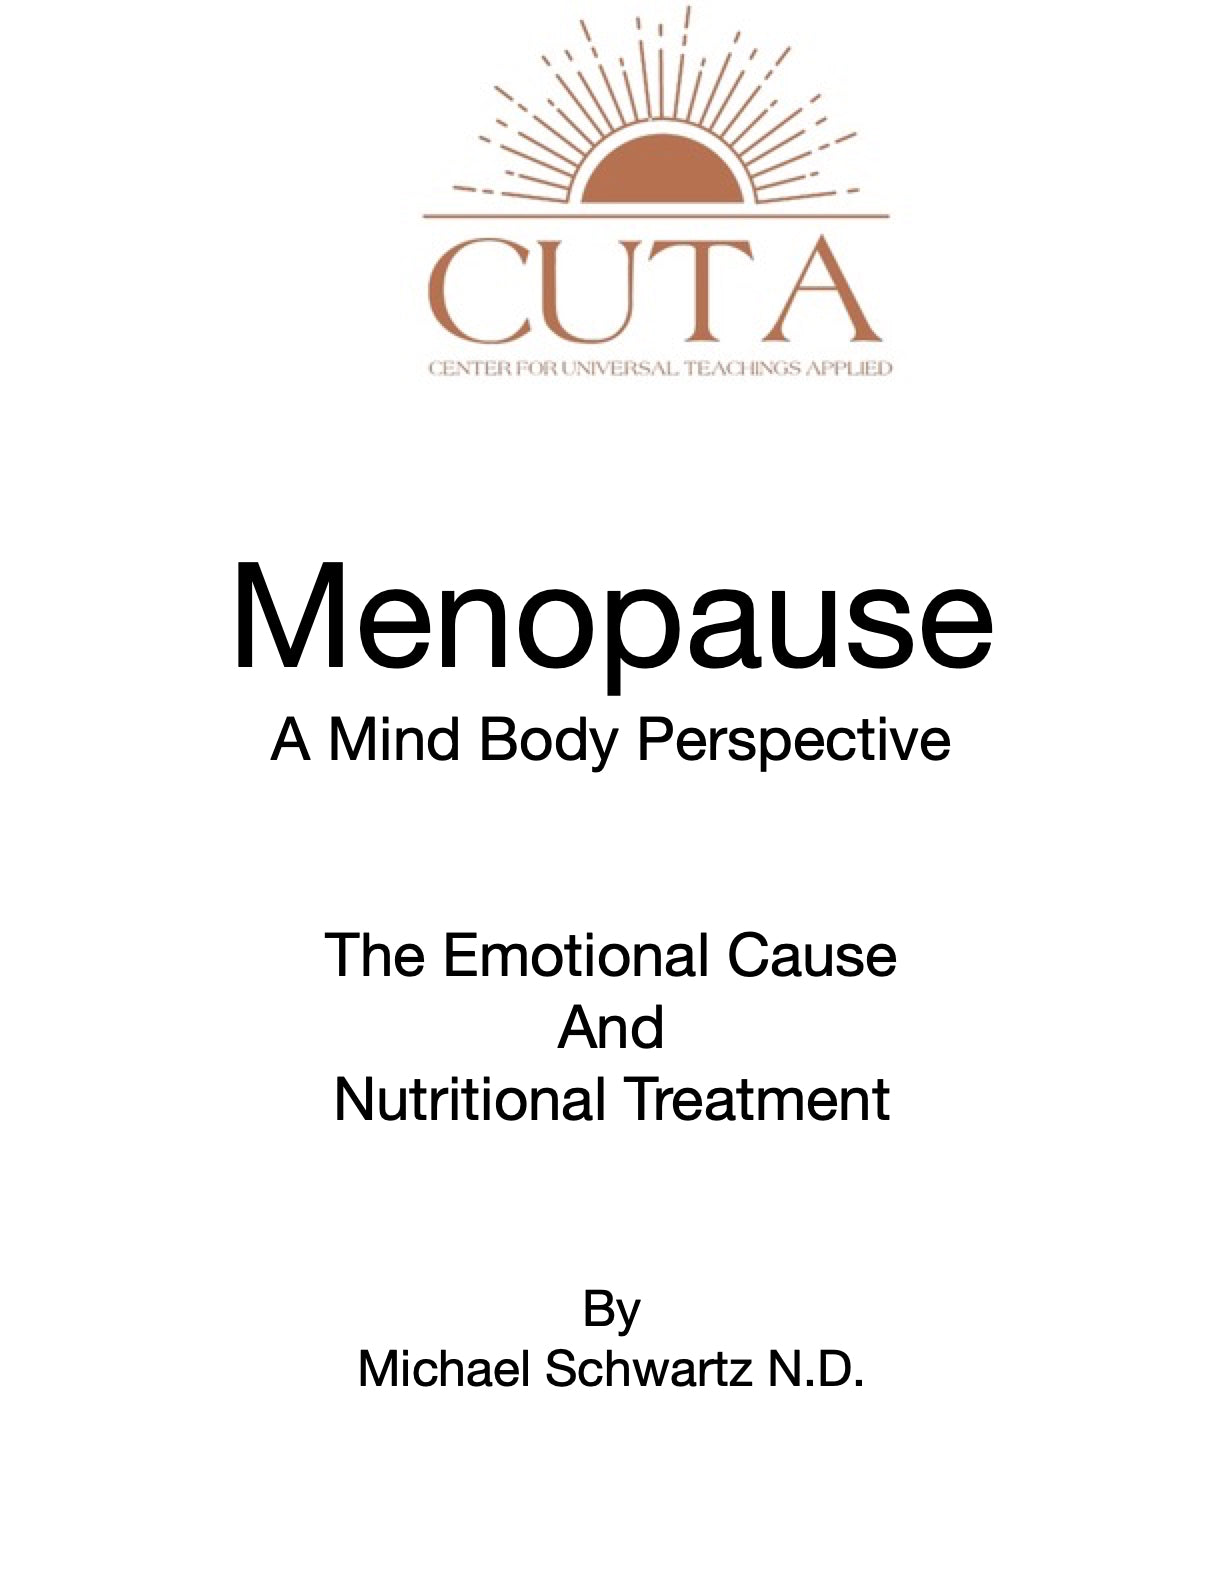 Menopause Booklets